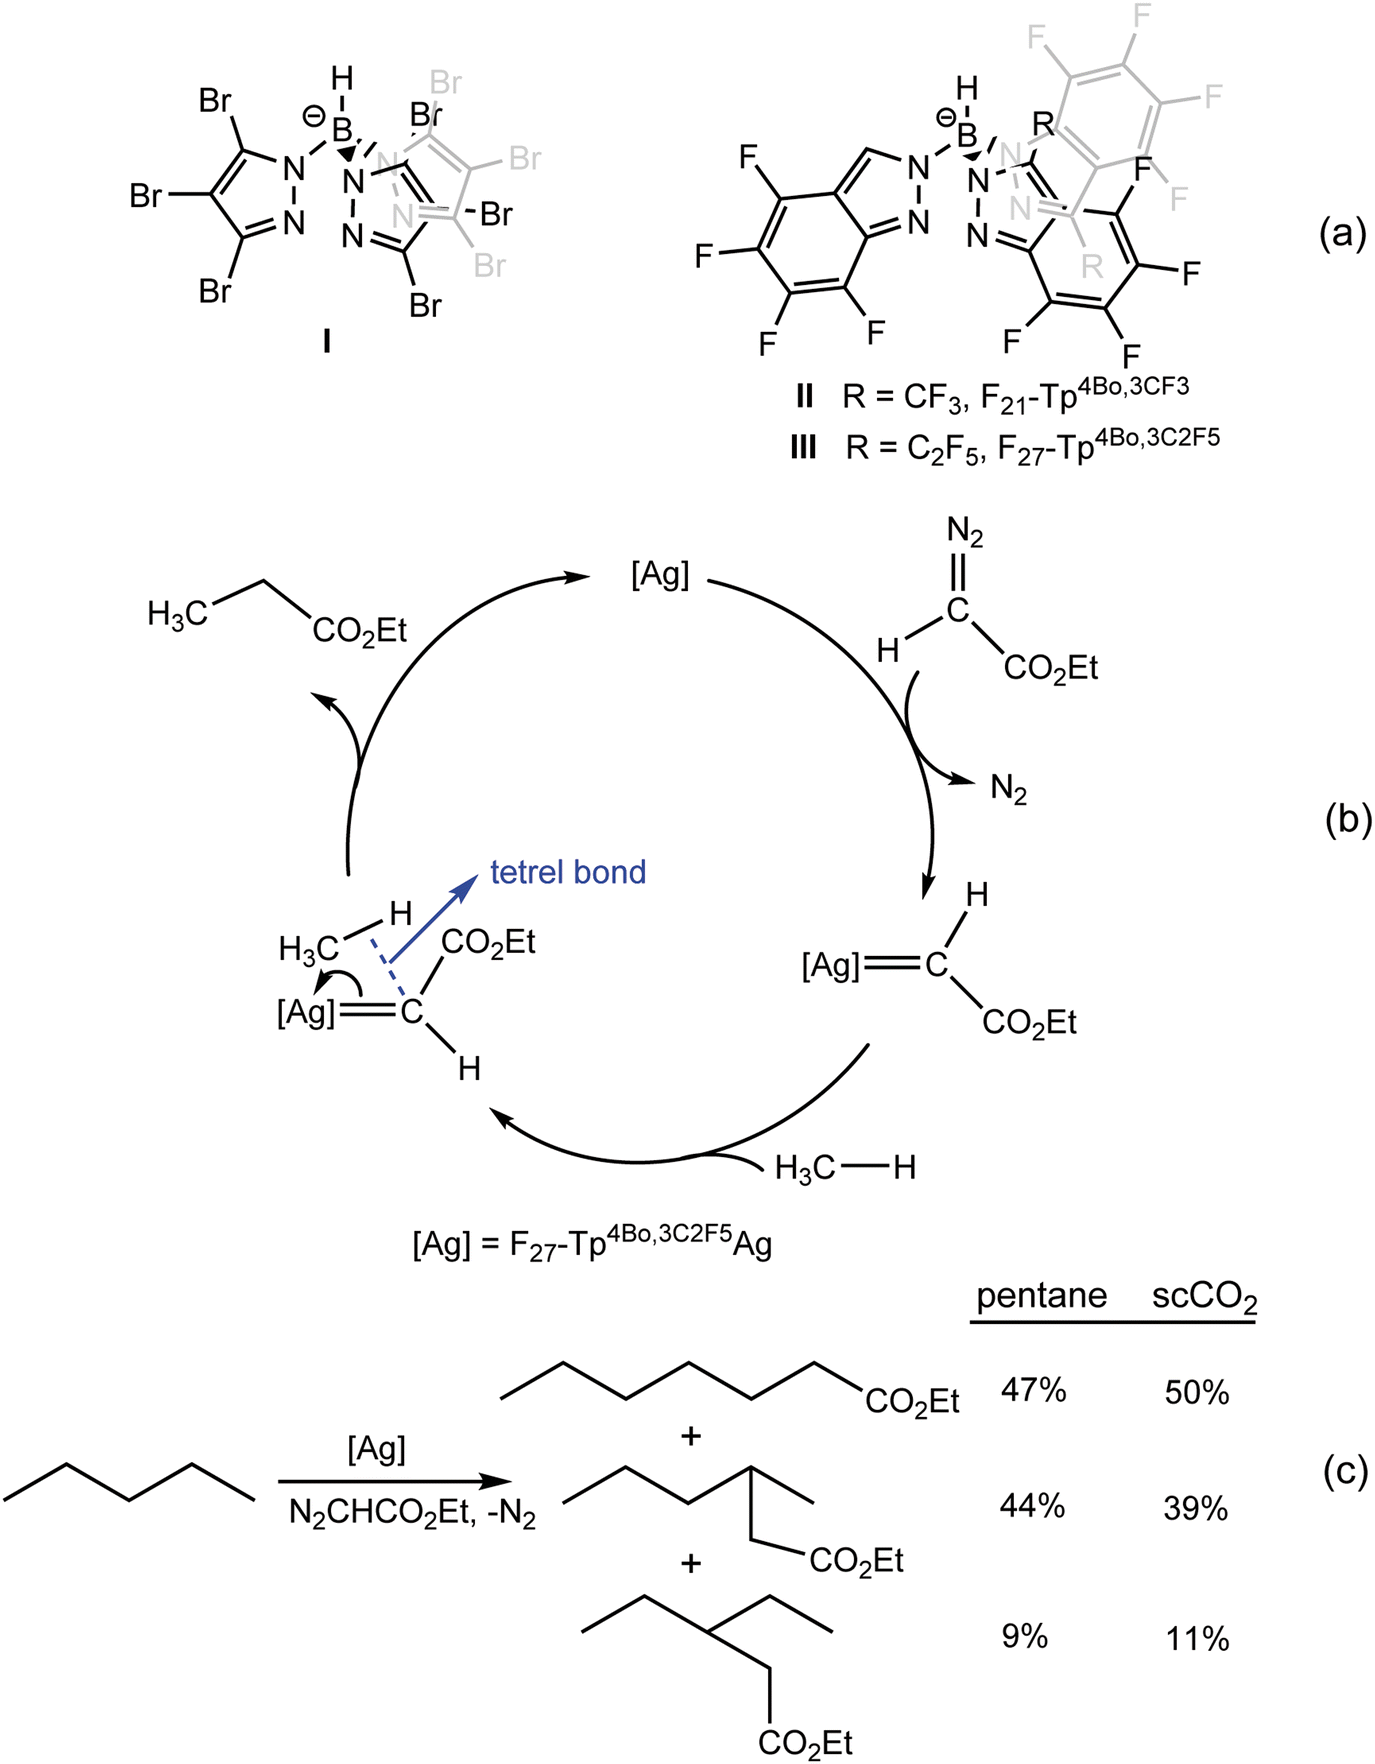 Chapter 1 Noncovalent Interactions In C H Bond Functionalization Rsc Publishing Doi 10 1039